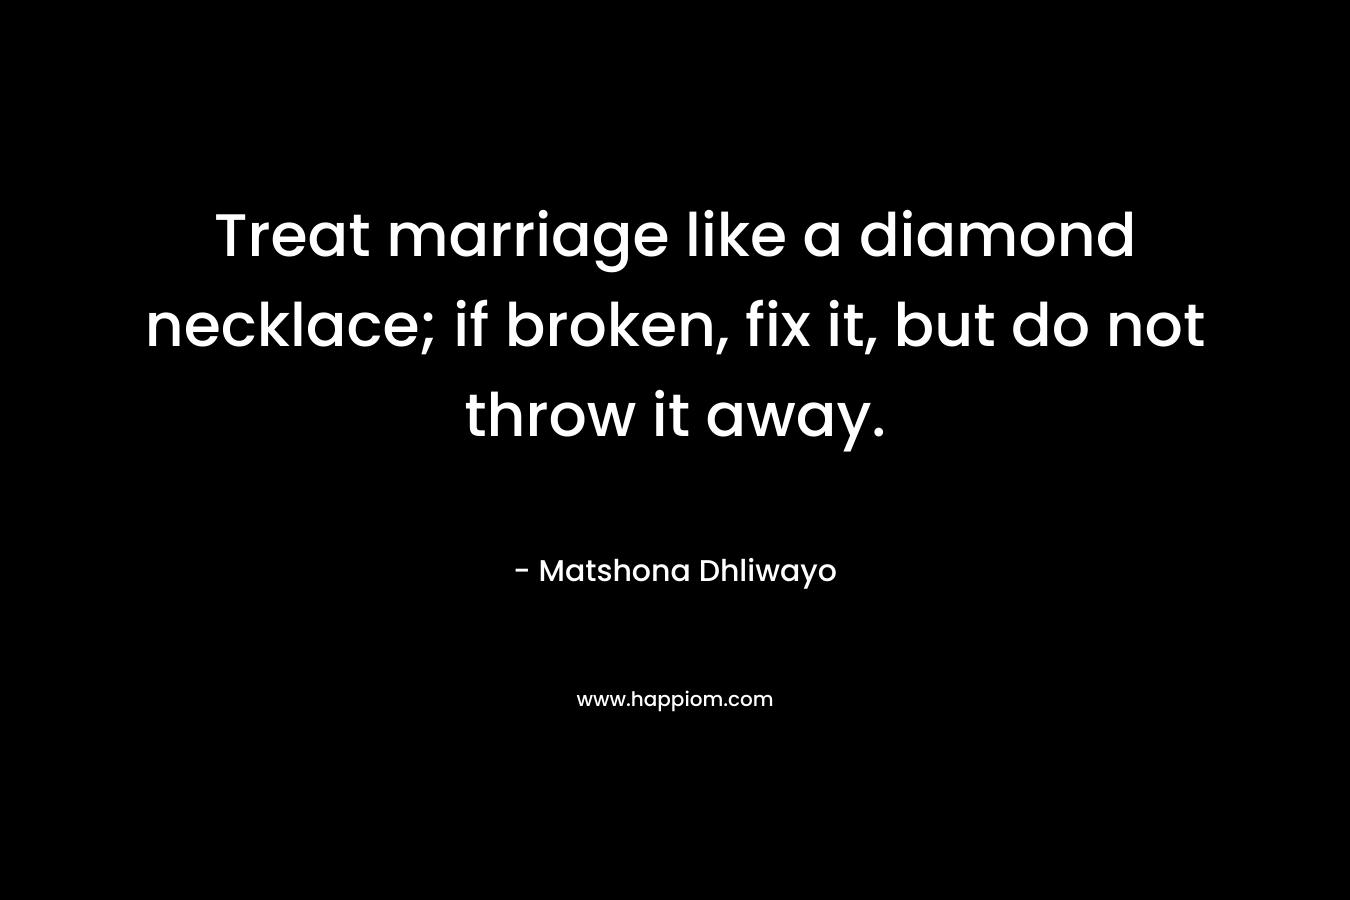 Treat marriage like a diamond necklace; if broken, fix it, but do not throw it away.